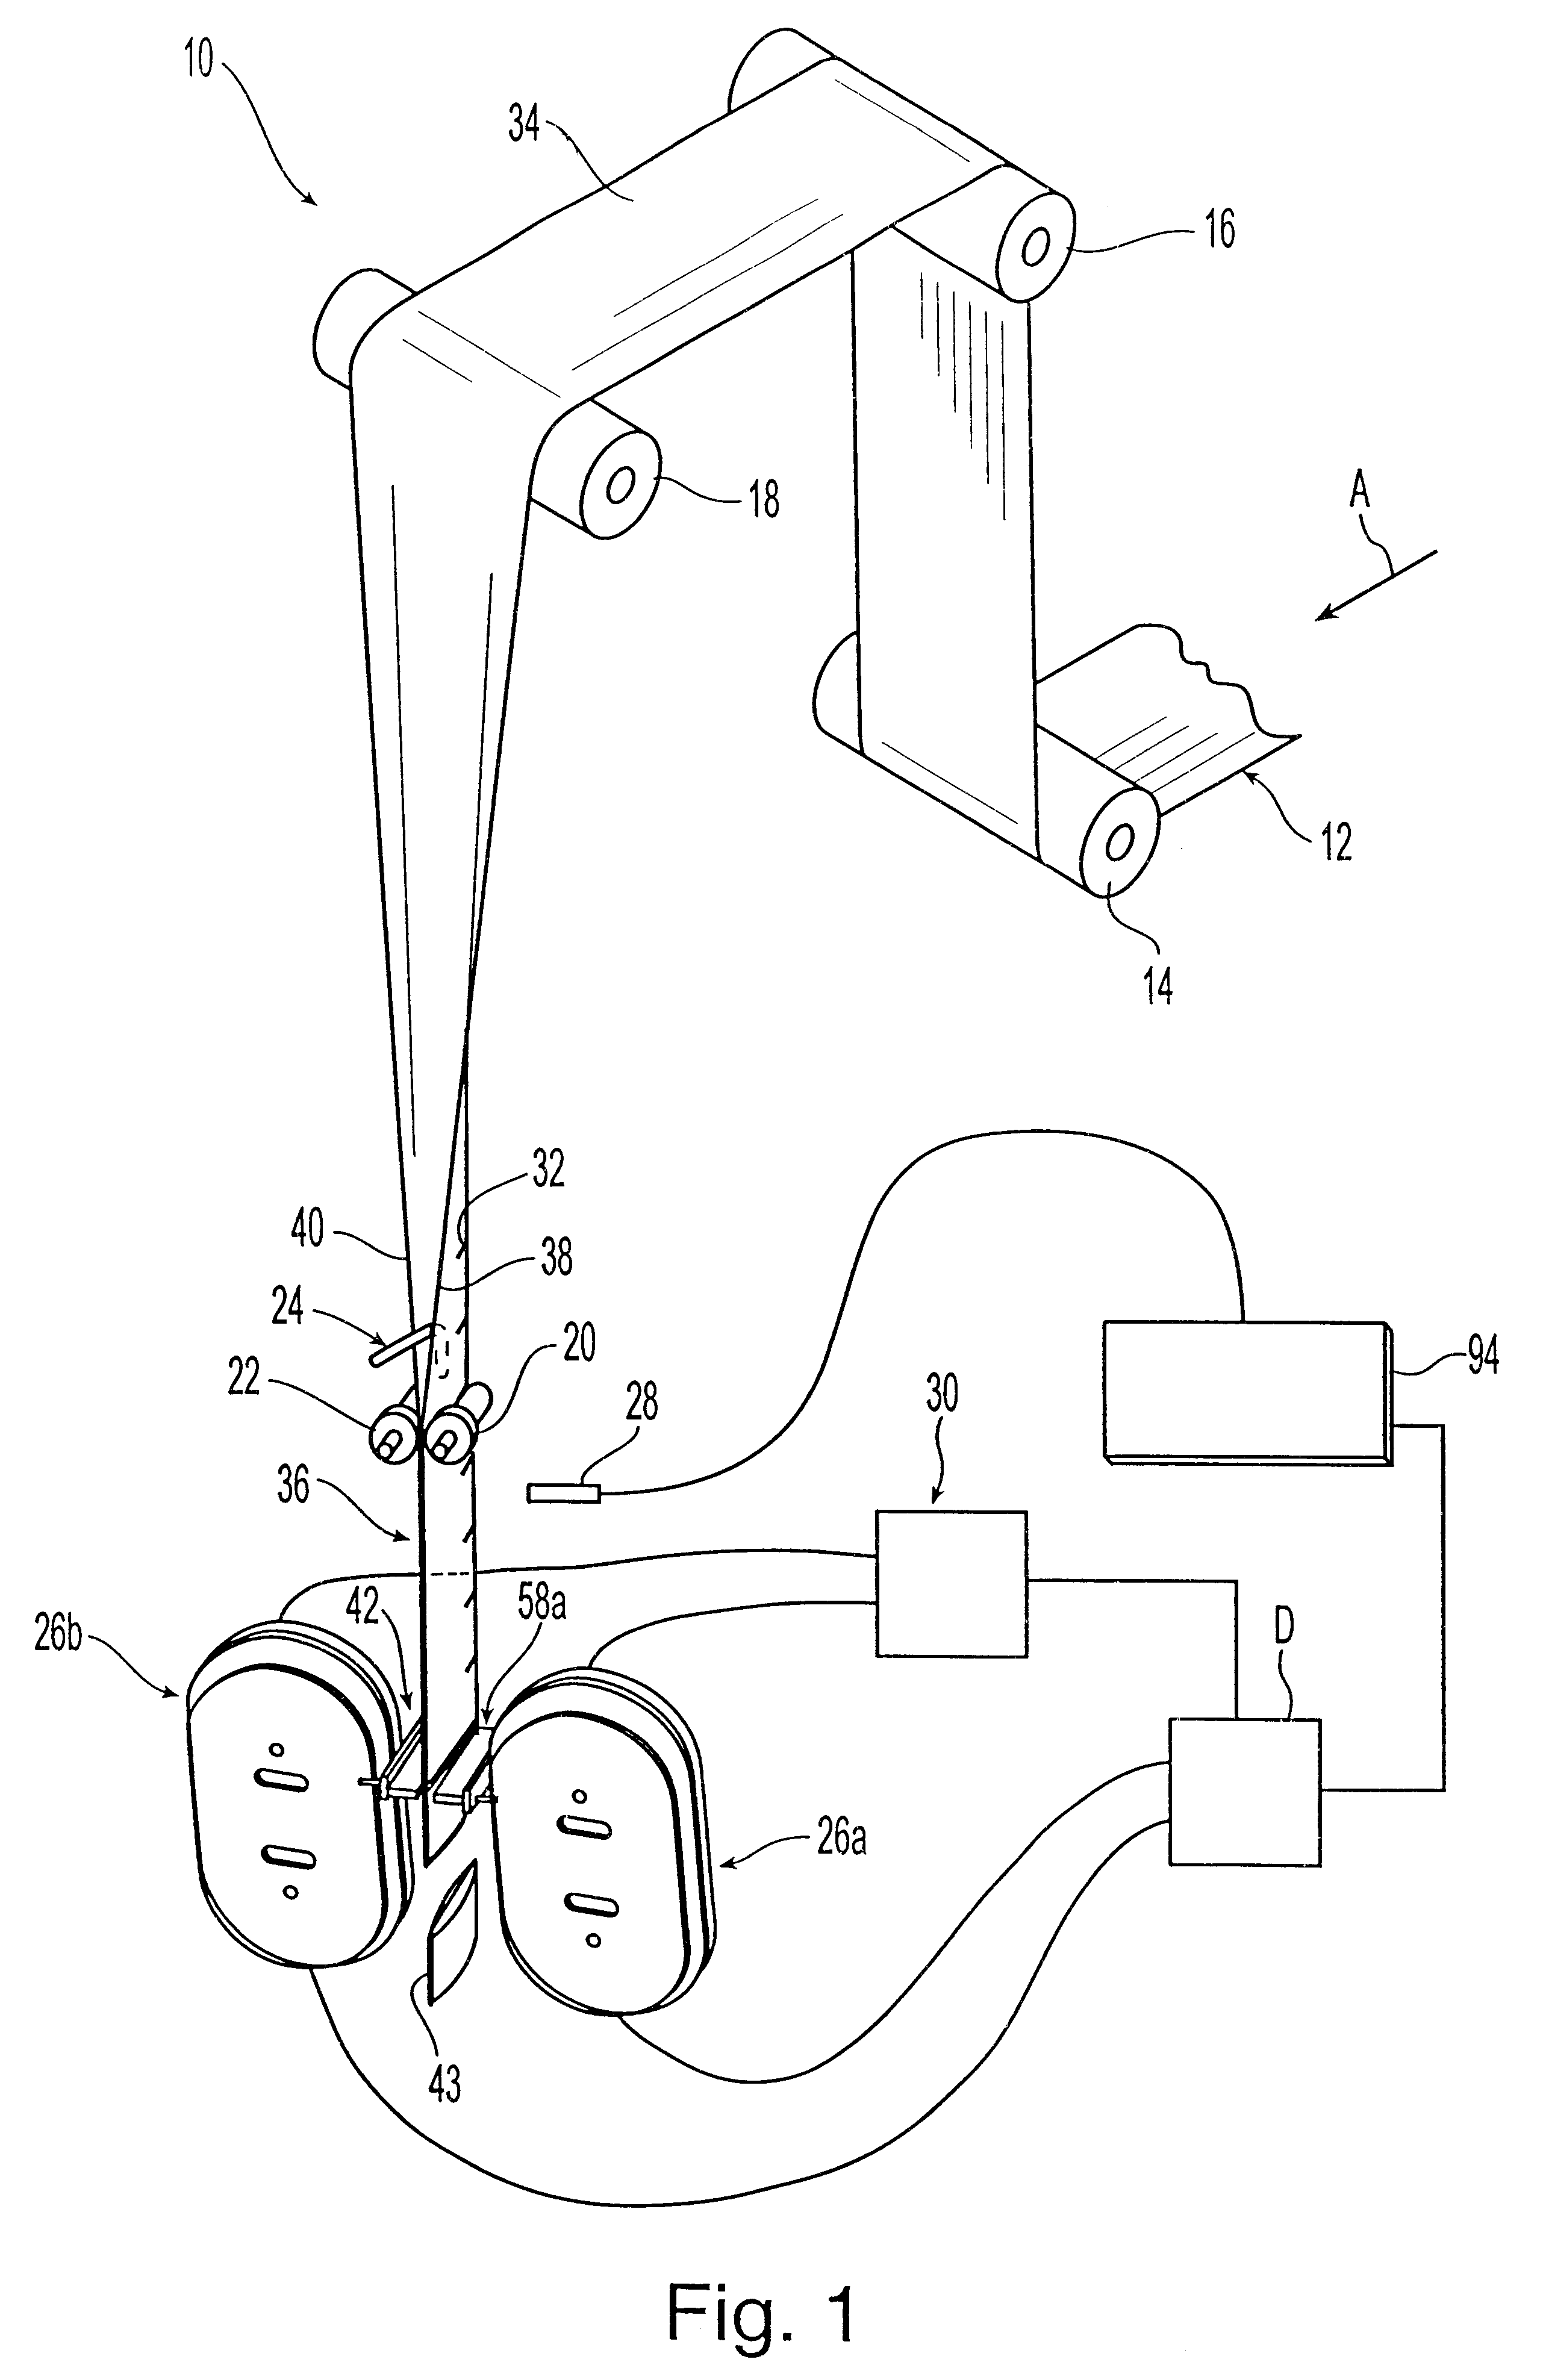 Position feedback system and method for use thereof